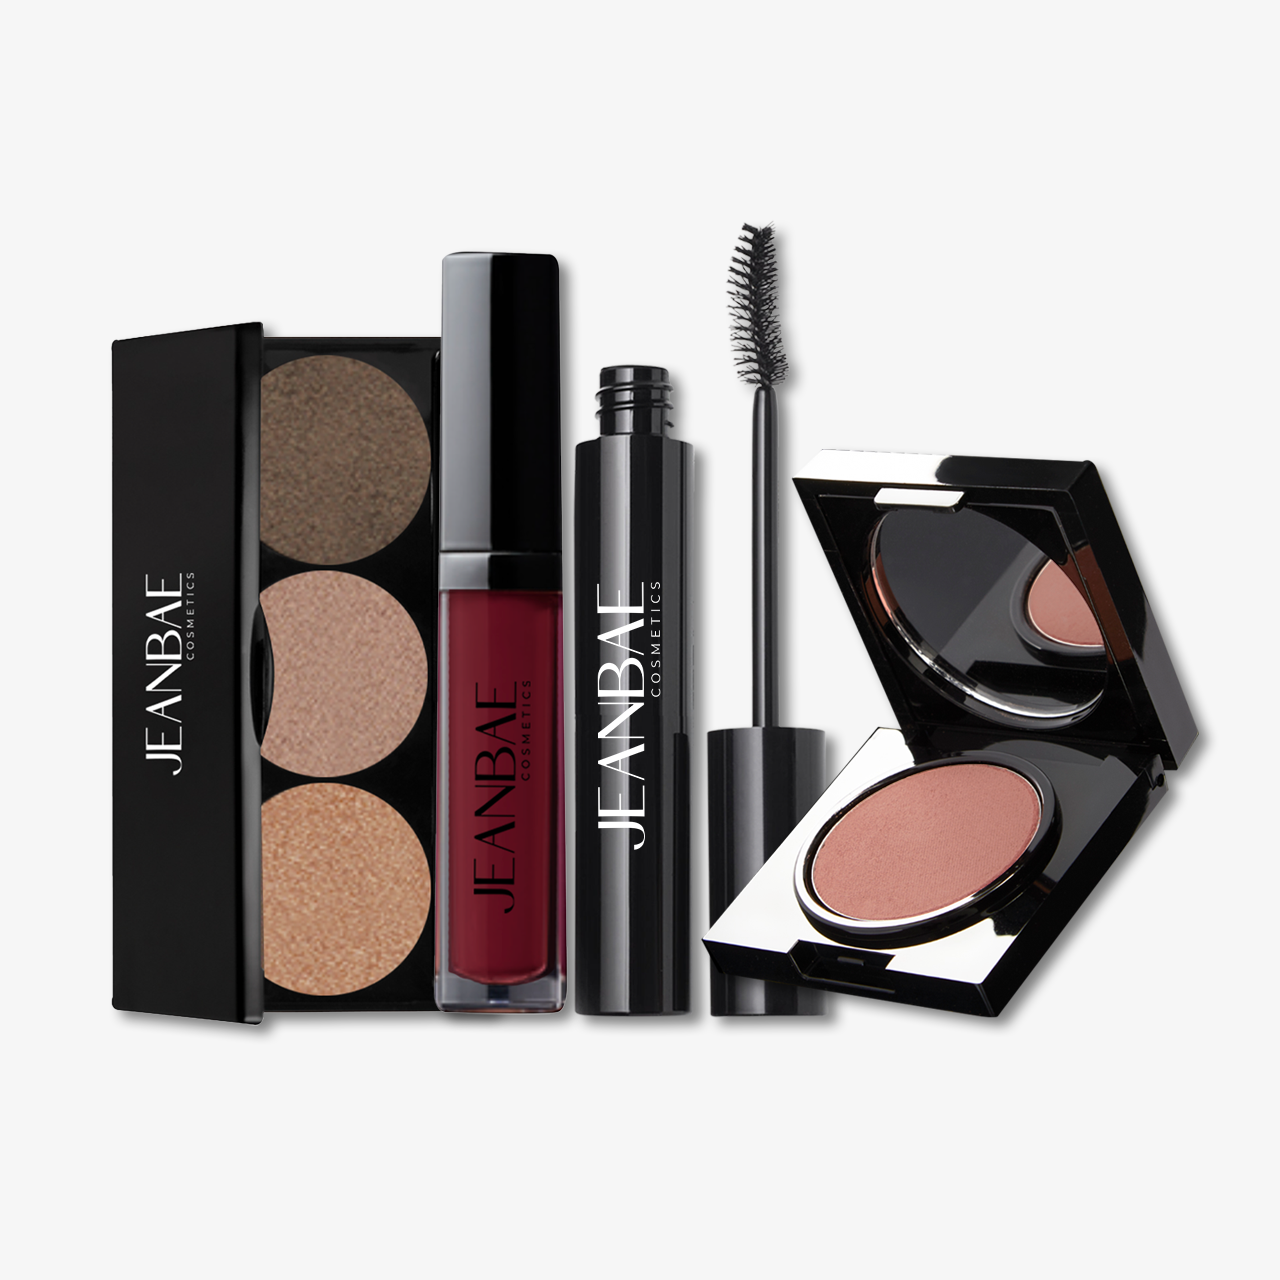 JEANBAE's Power Pop Set features the XLXL Mascara, Blusher, Liquid Velvet Lipstick in Caliente, and 3 Well Eyeshadow Palette in Naked.  FEATURES Limited edition skincare set Full-size items Cruelty-Free